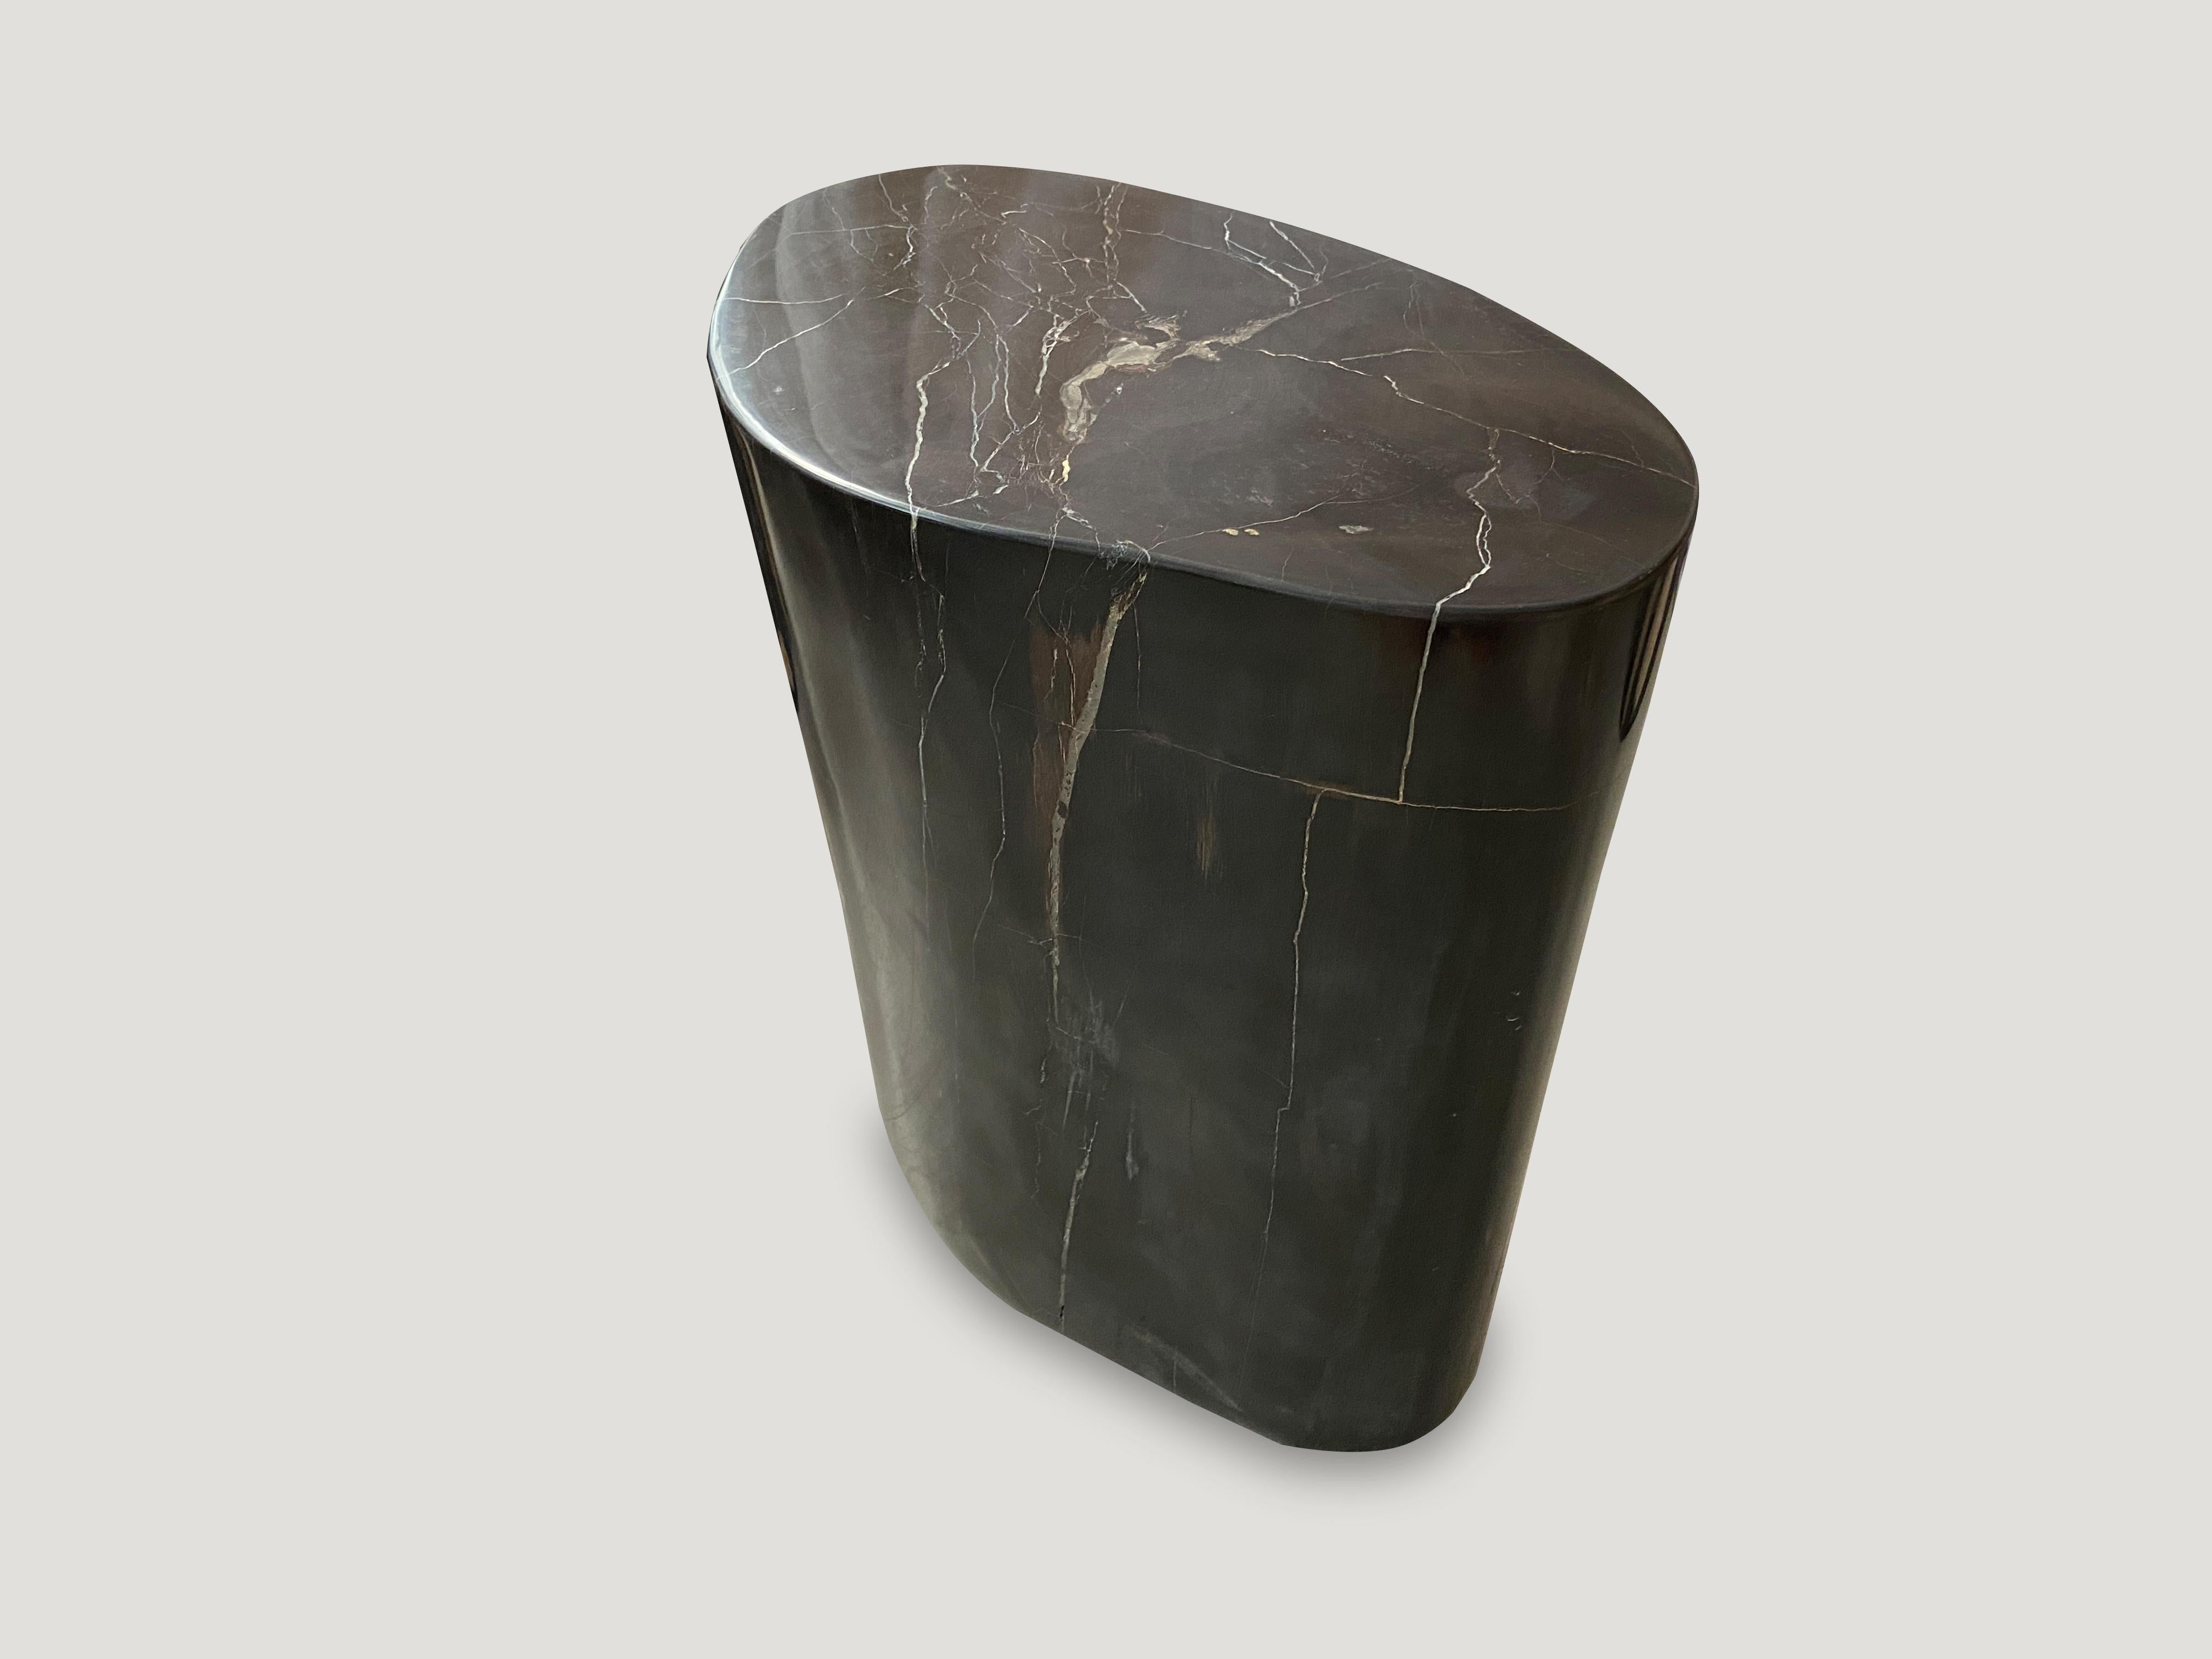 Minimalist black with fine white veins on this high quality petrified wood side table. It’s fascinating how Mother Nature produces these exquisite 40 million year old petrified teak logs with such contrasting colors and natural patterns throughout.